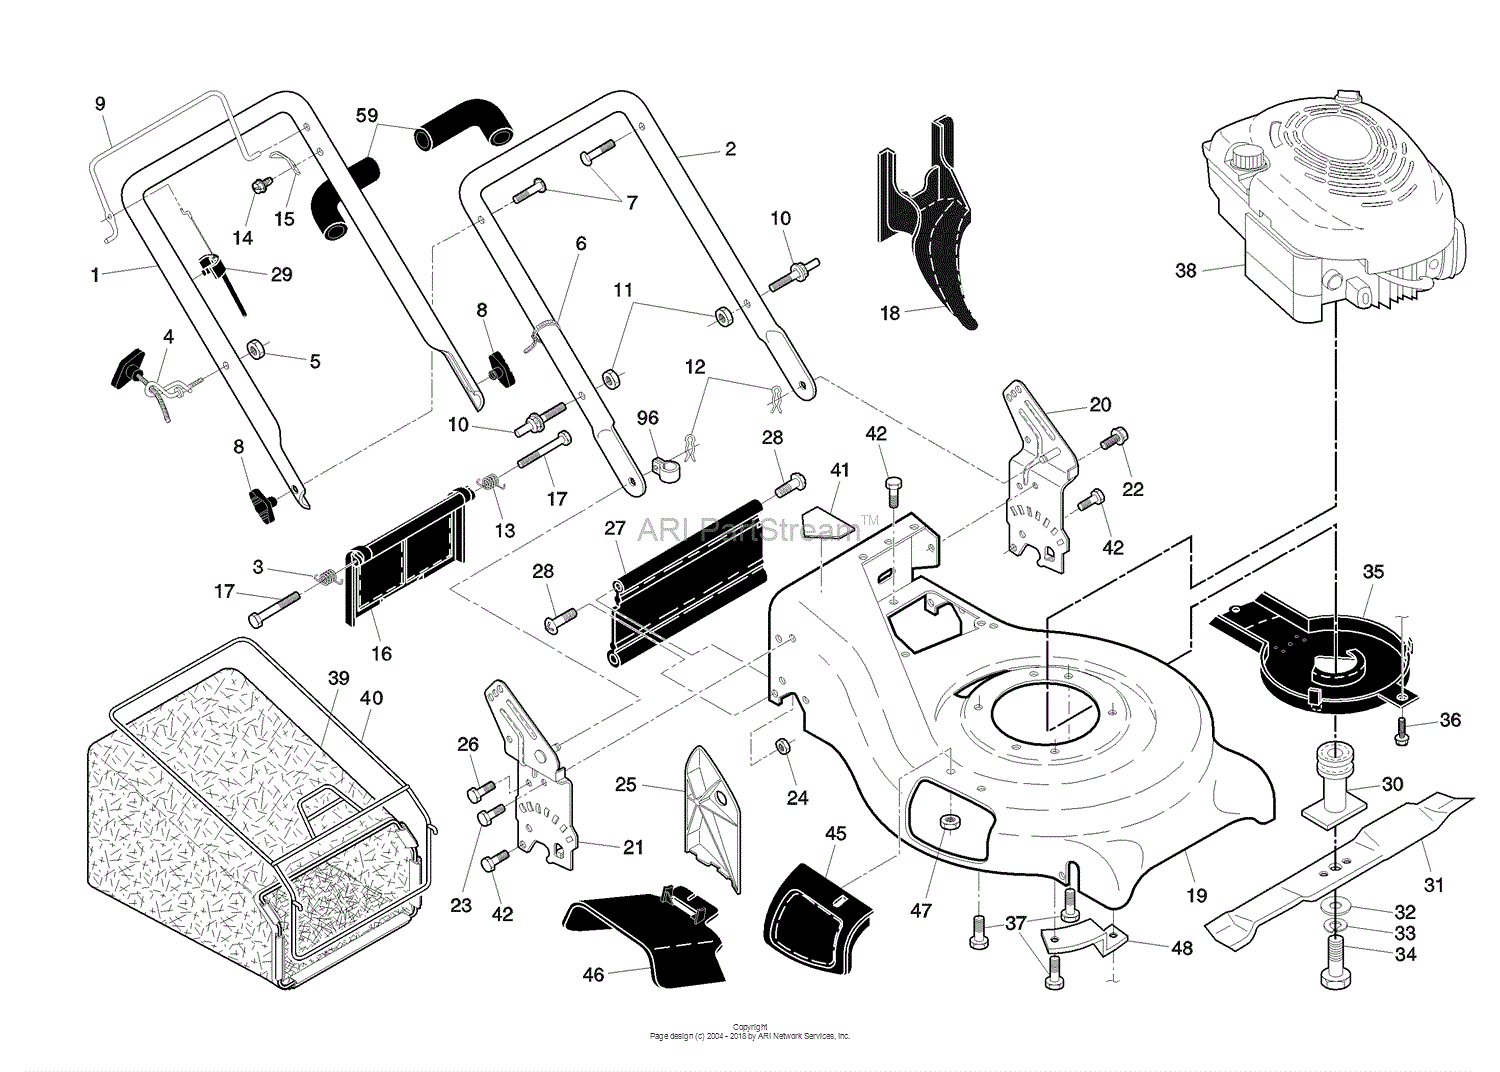 Husqvarna 6521 RS (961450005-00) (2007-09) Parts Diagram for Rotary